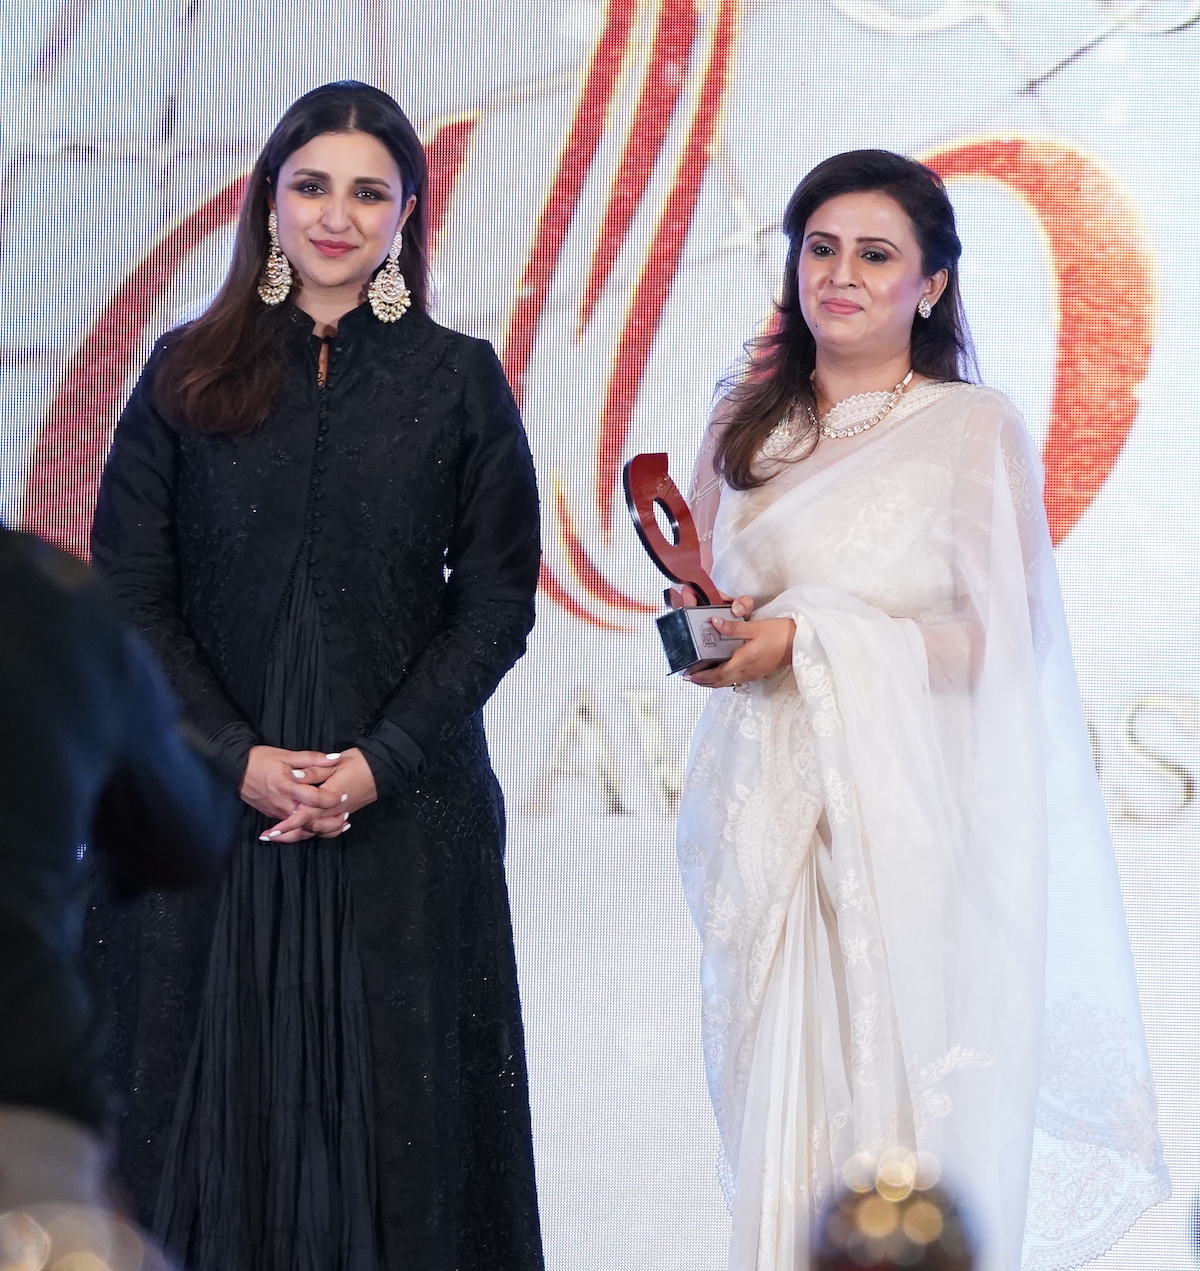 Chharu Dhingra was honoured with The Golden Glory Award, 2023 for Spiritual Leadership Excellence in Tarot & Astrology, by Parineeti Chopra.